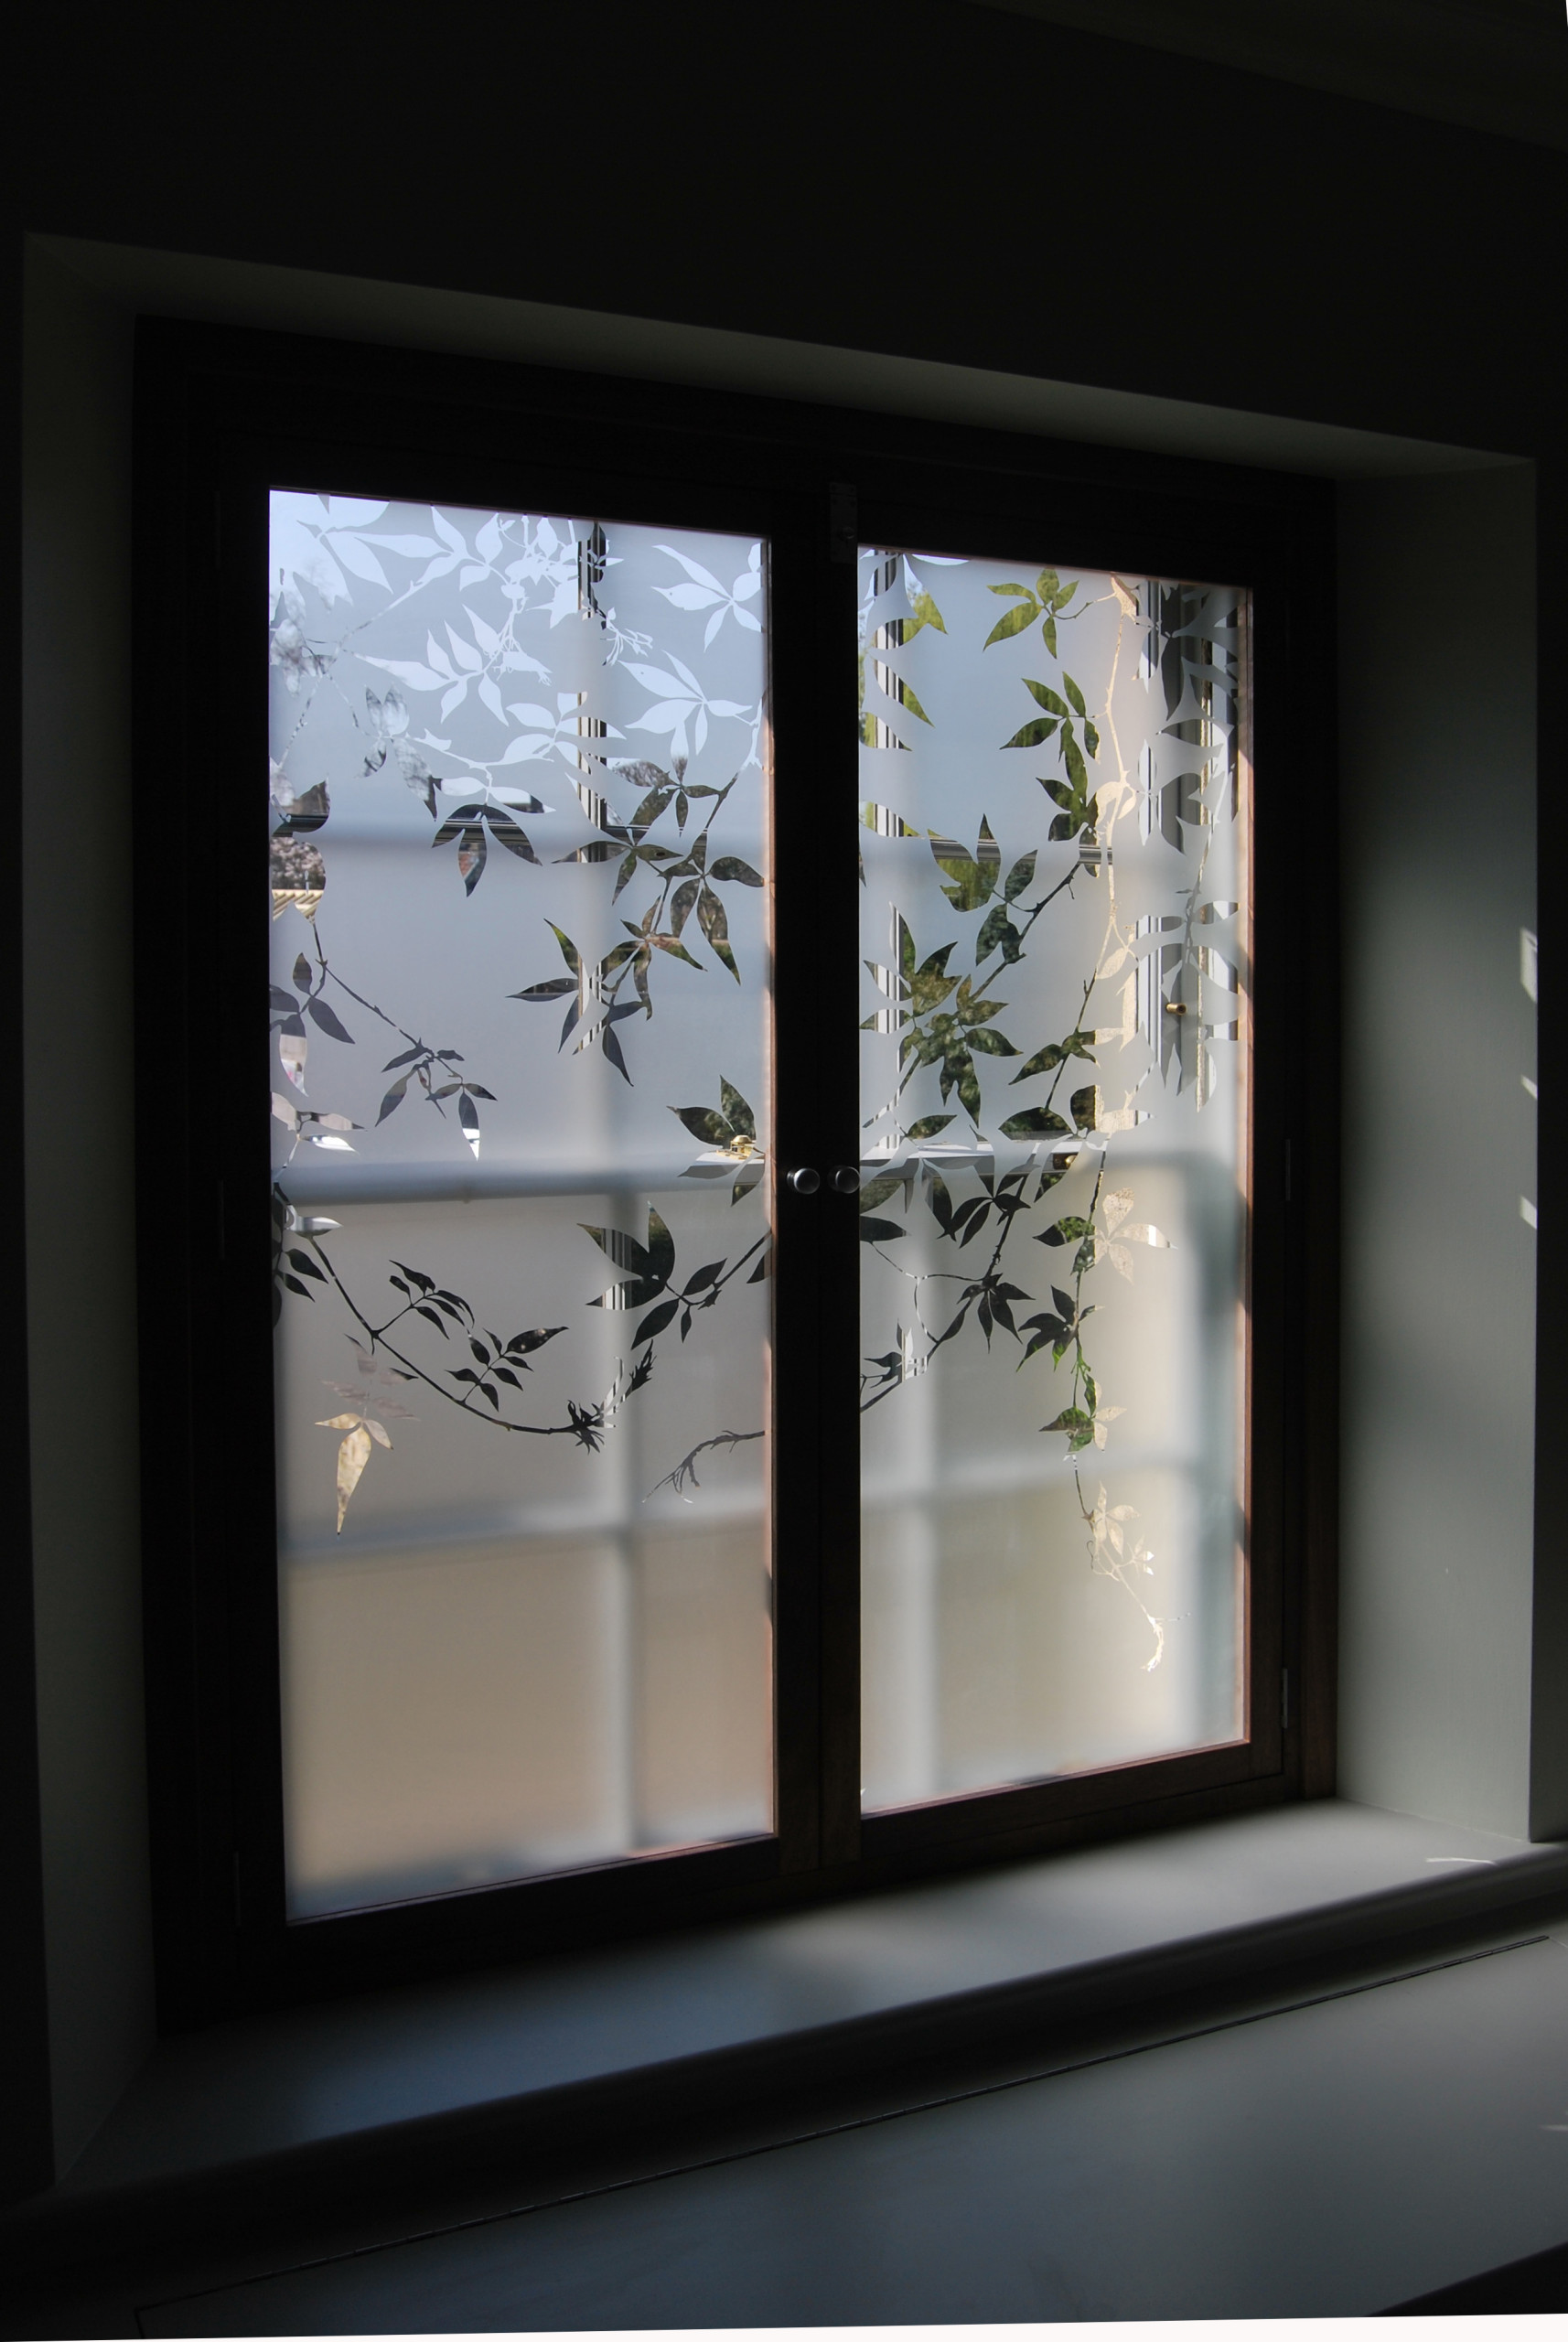 Etched Glass Window Photos Designs